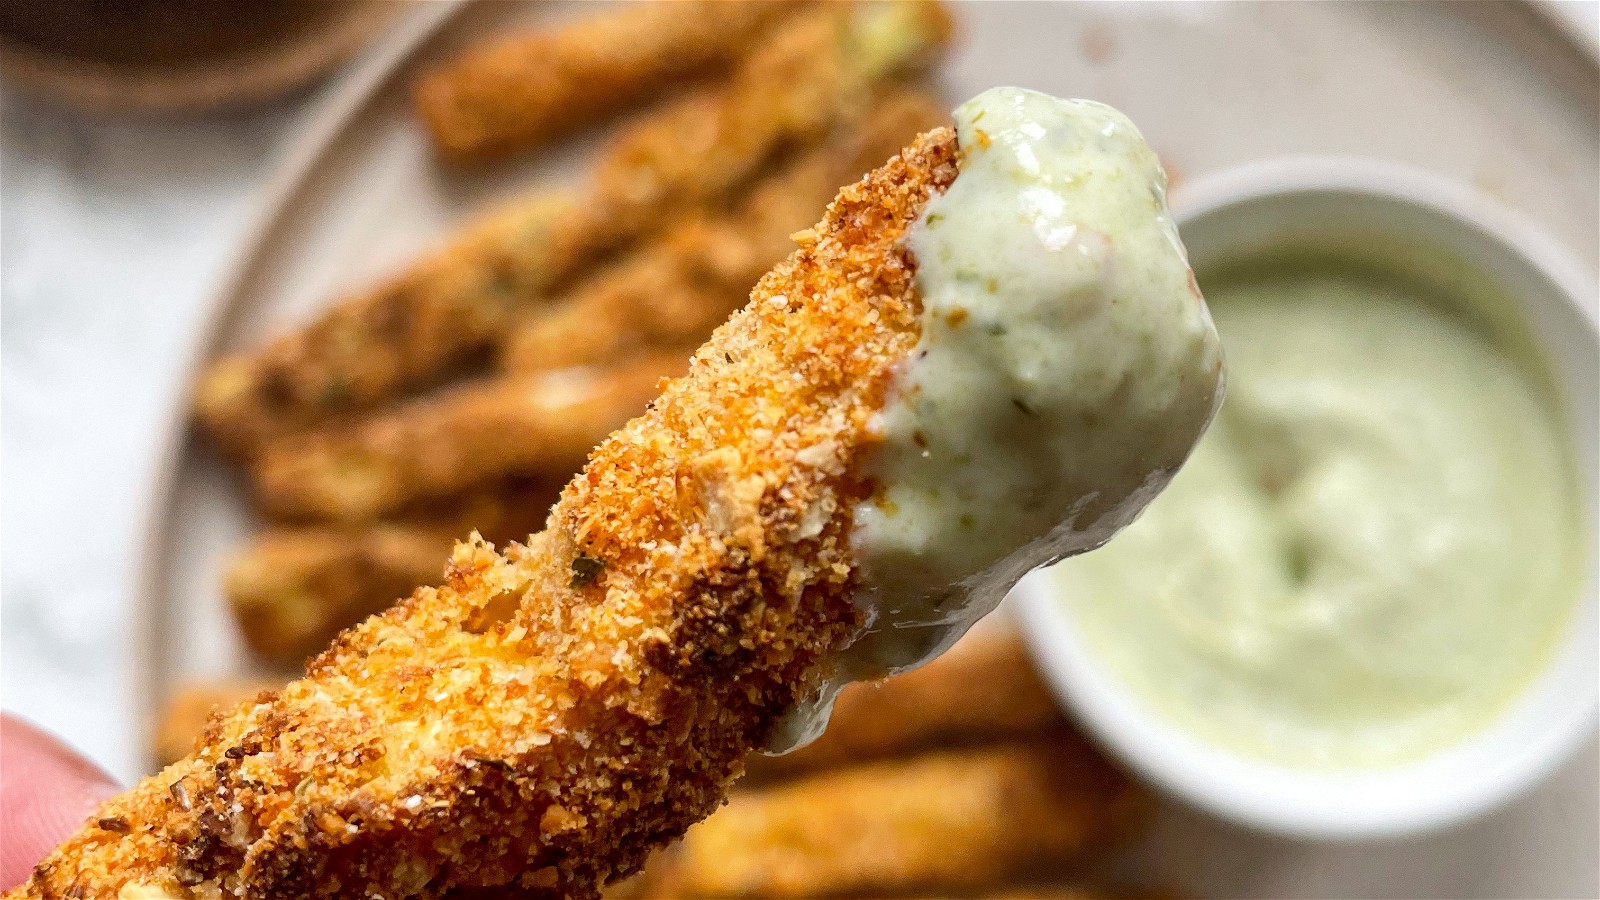 Image of Air Fryer Zucchini Fries